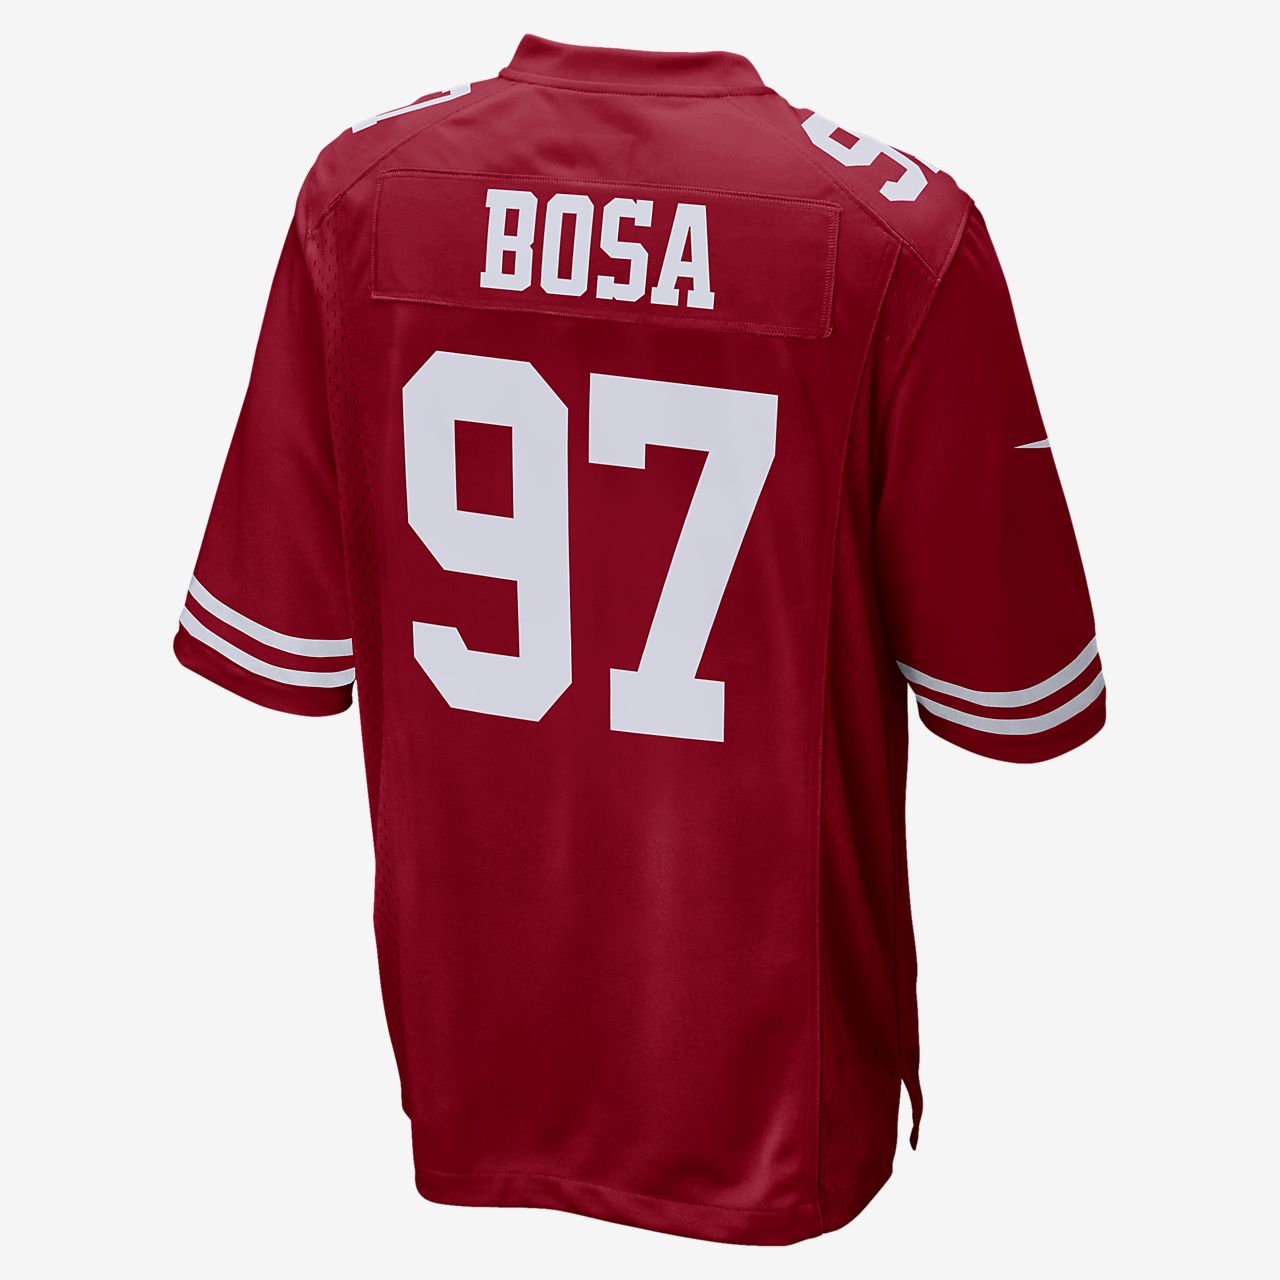 where to buy 49ers jerseys